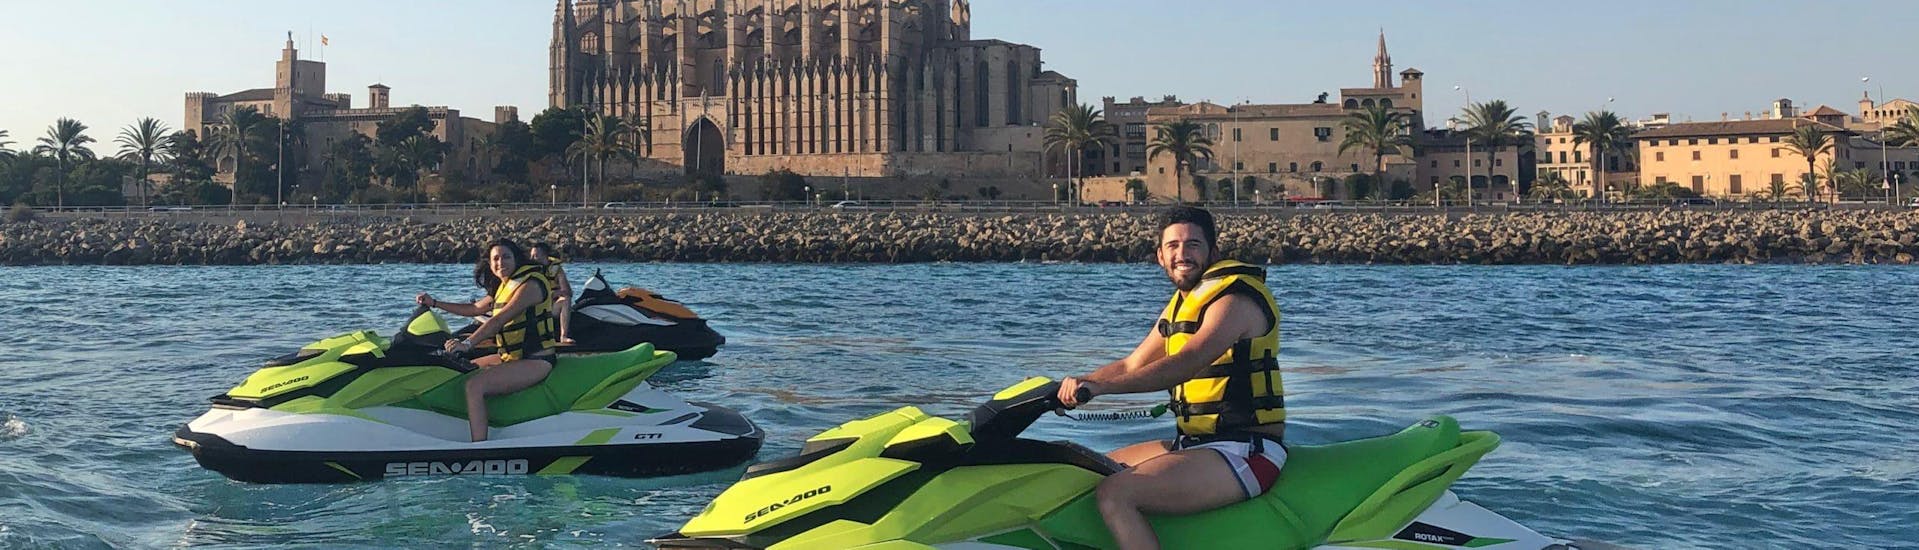 A group of people go on a safari jetski to the Cathedral of Palma with Mallorca on Jetski.